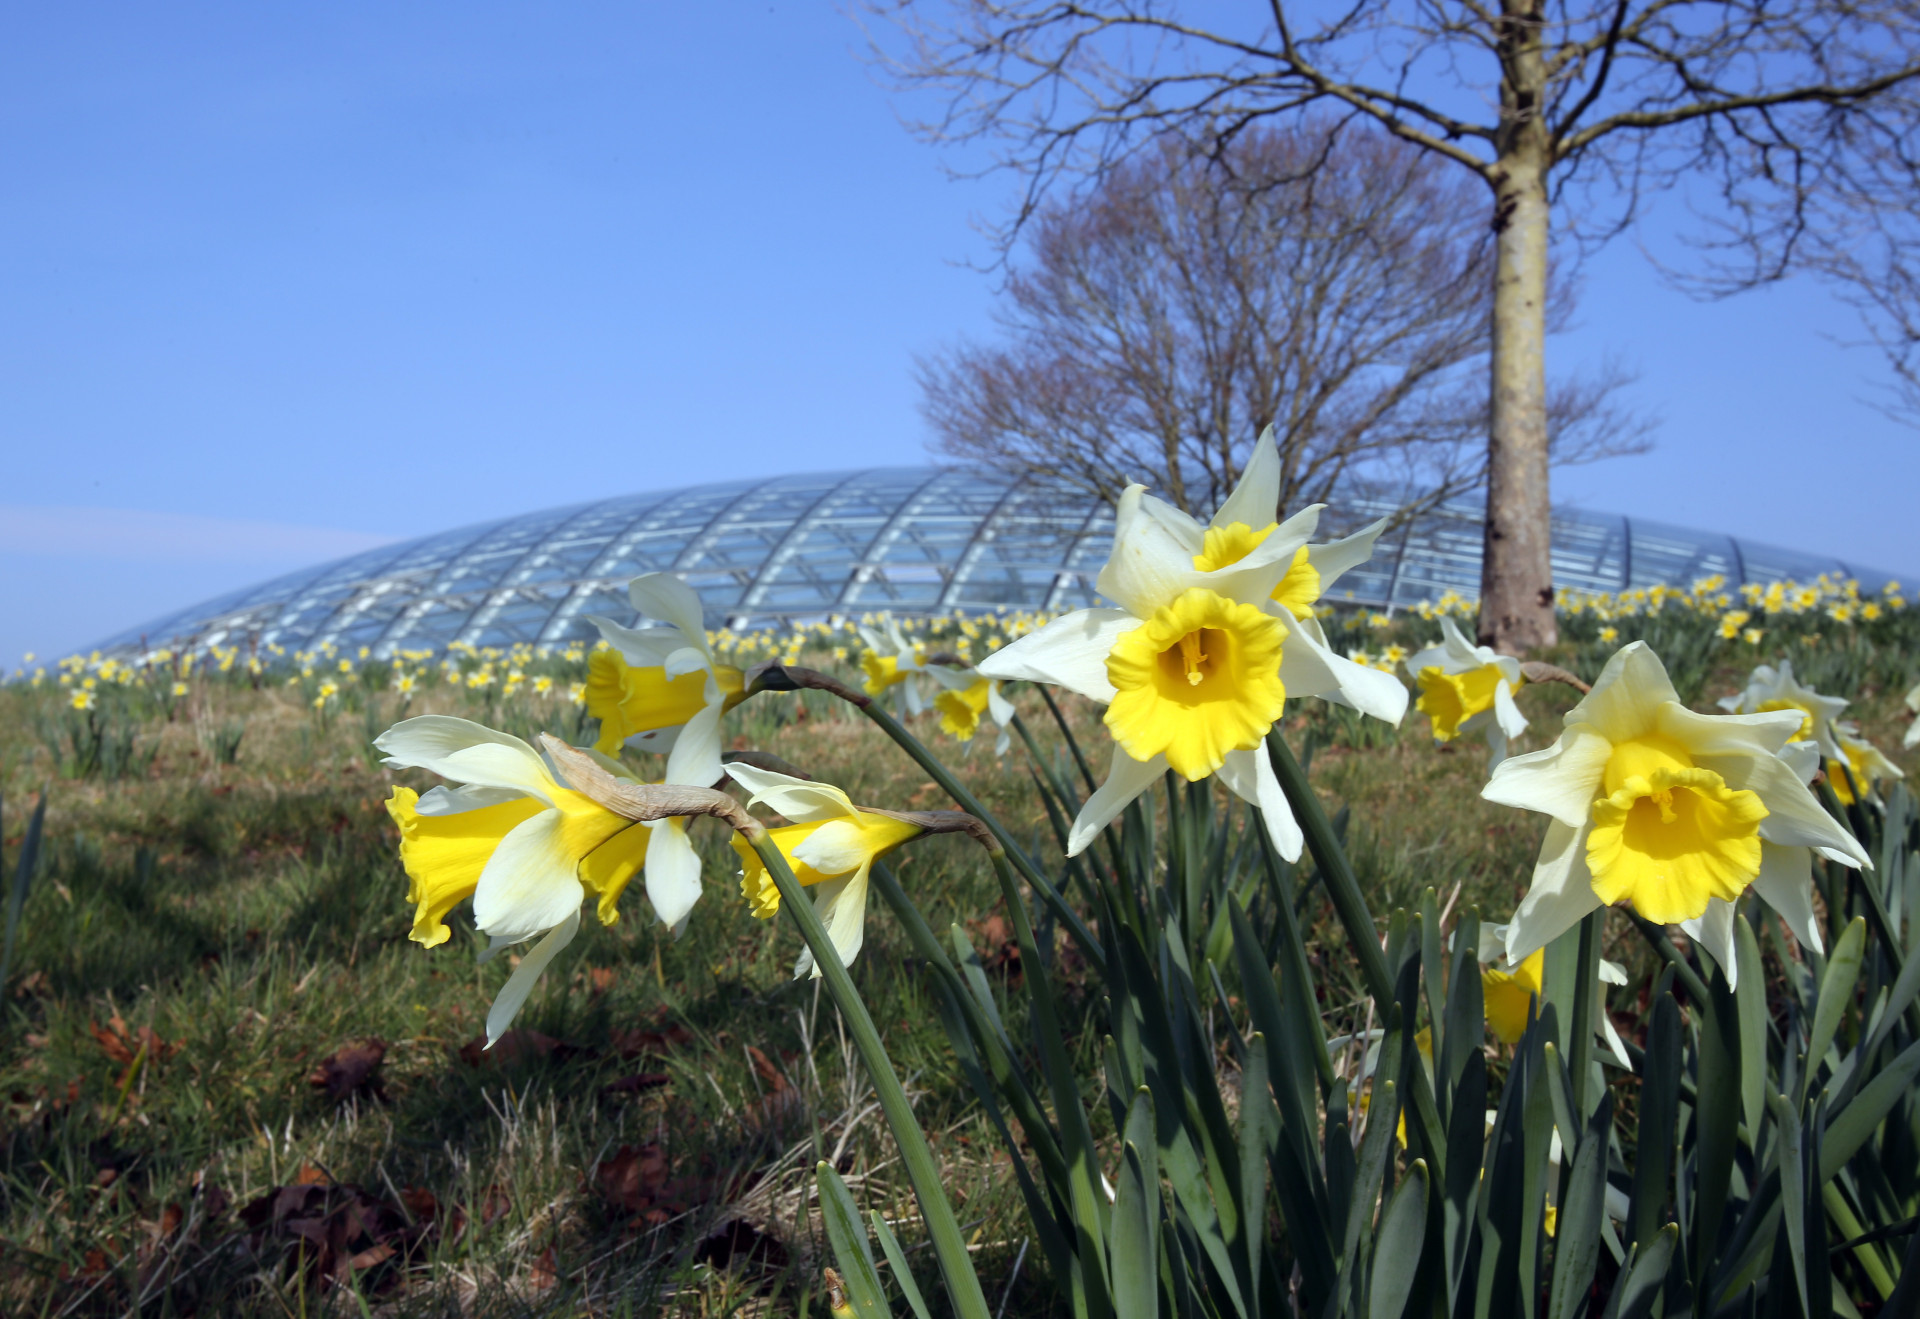 Daffodils grow in front of the Great Glasshouse at the National Botanic Garden of Wales near Carmarthen, Wales. <p>You may also like:<a href="https://www.starsinsider.com/n/434516?utm_source=msn.com&utm_medium=display&utm_campaign=referral_description&utm_content=344596v2en-us"> Vitamin D: The effects of too much and too little sunlight on human health</a></p>